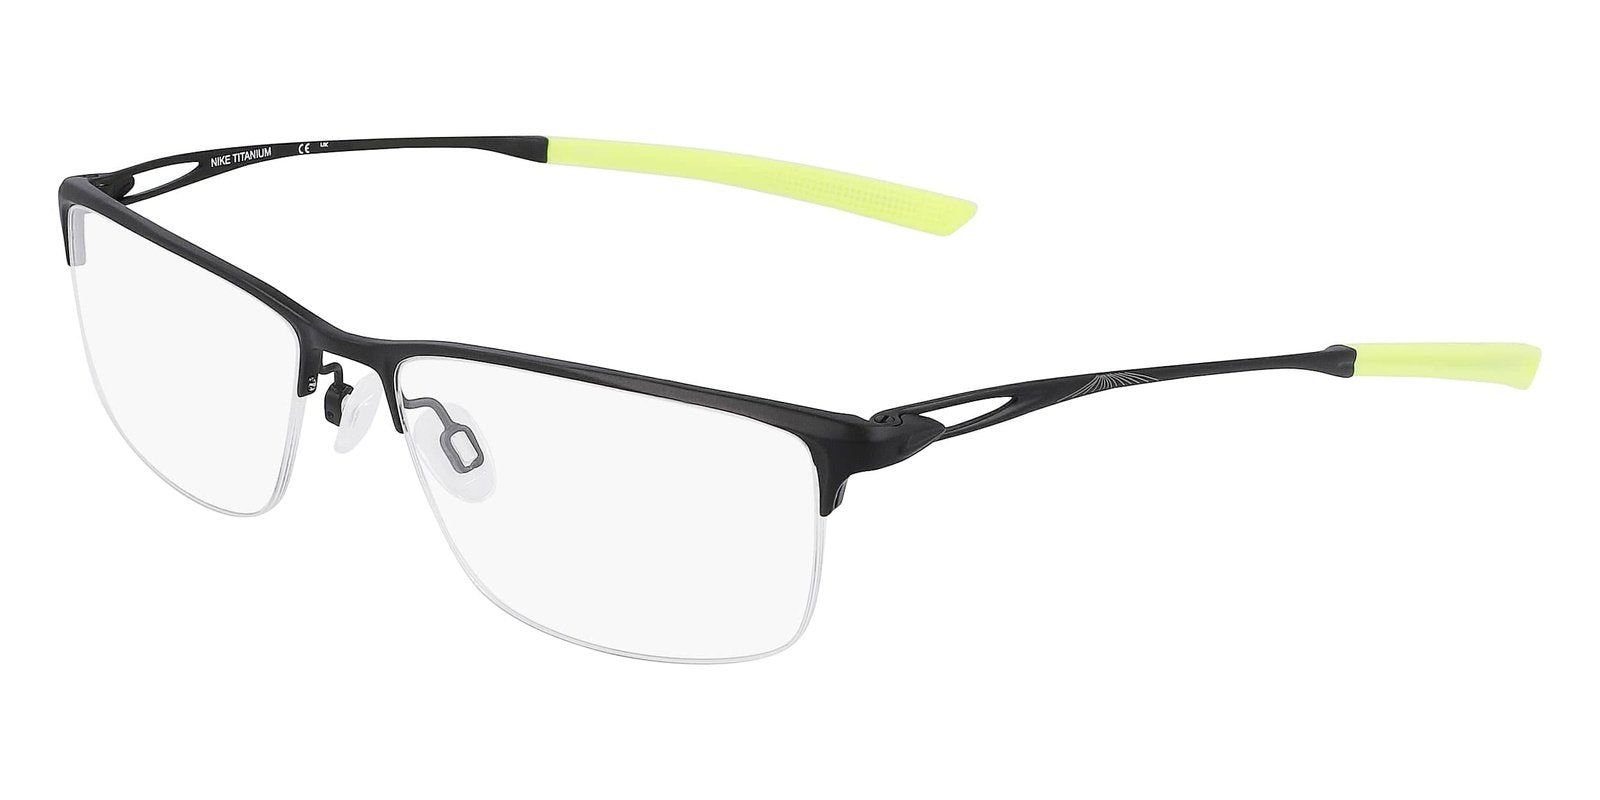  Nike 6064 Black (007) | Spectacle Clinic